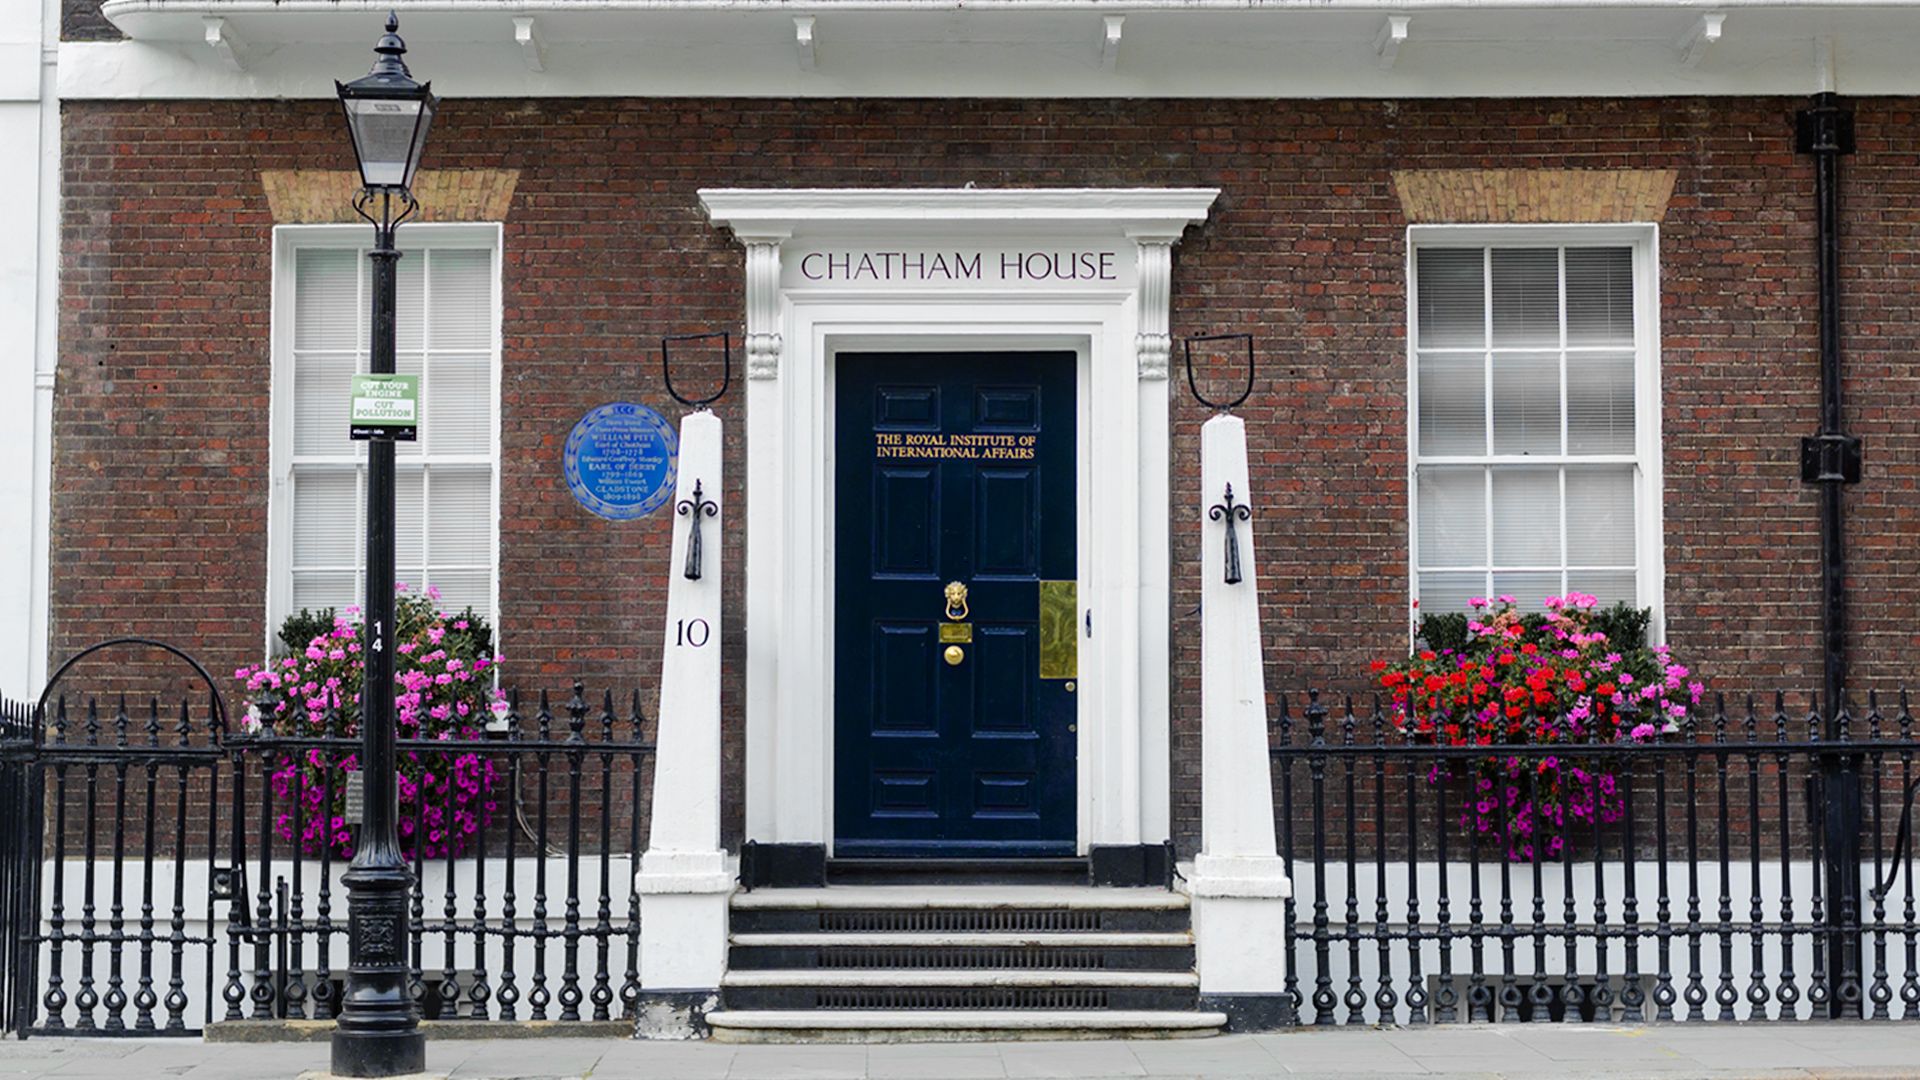 The Secret Societies in Chatham House at Number 10 St James's Square